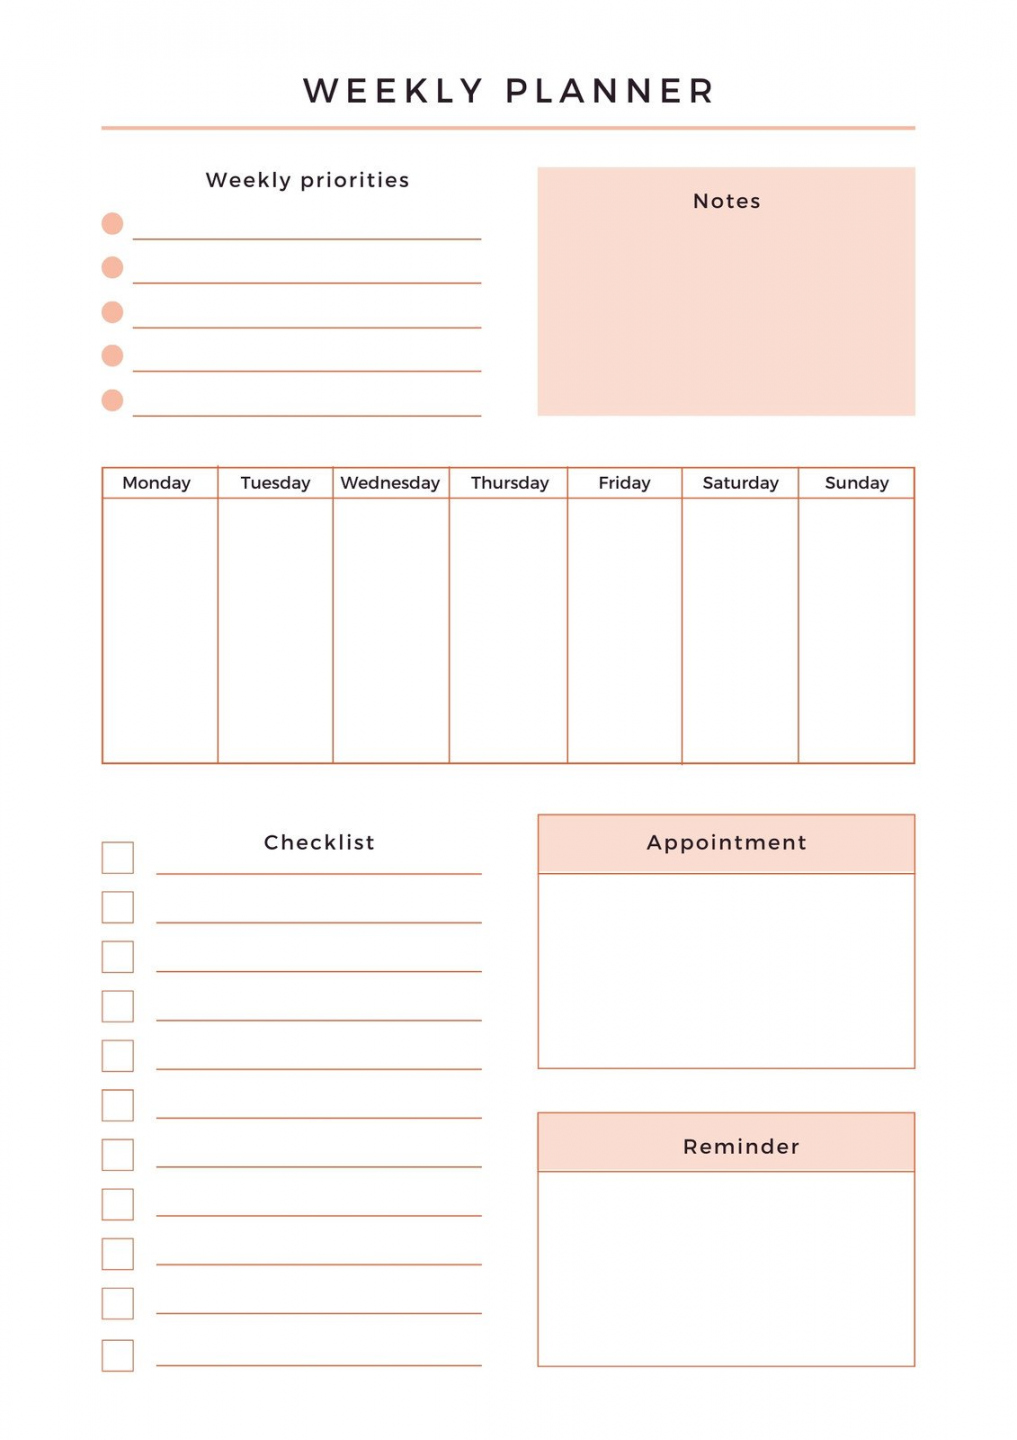 Free Printable Weekly Planner - Printable - Free and customizable weekly planner templates  Canva